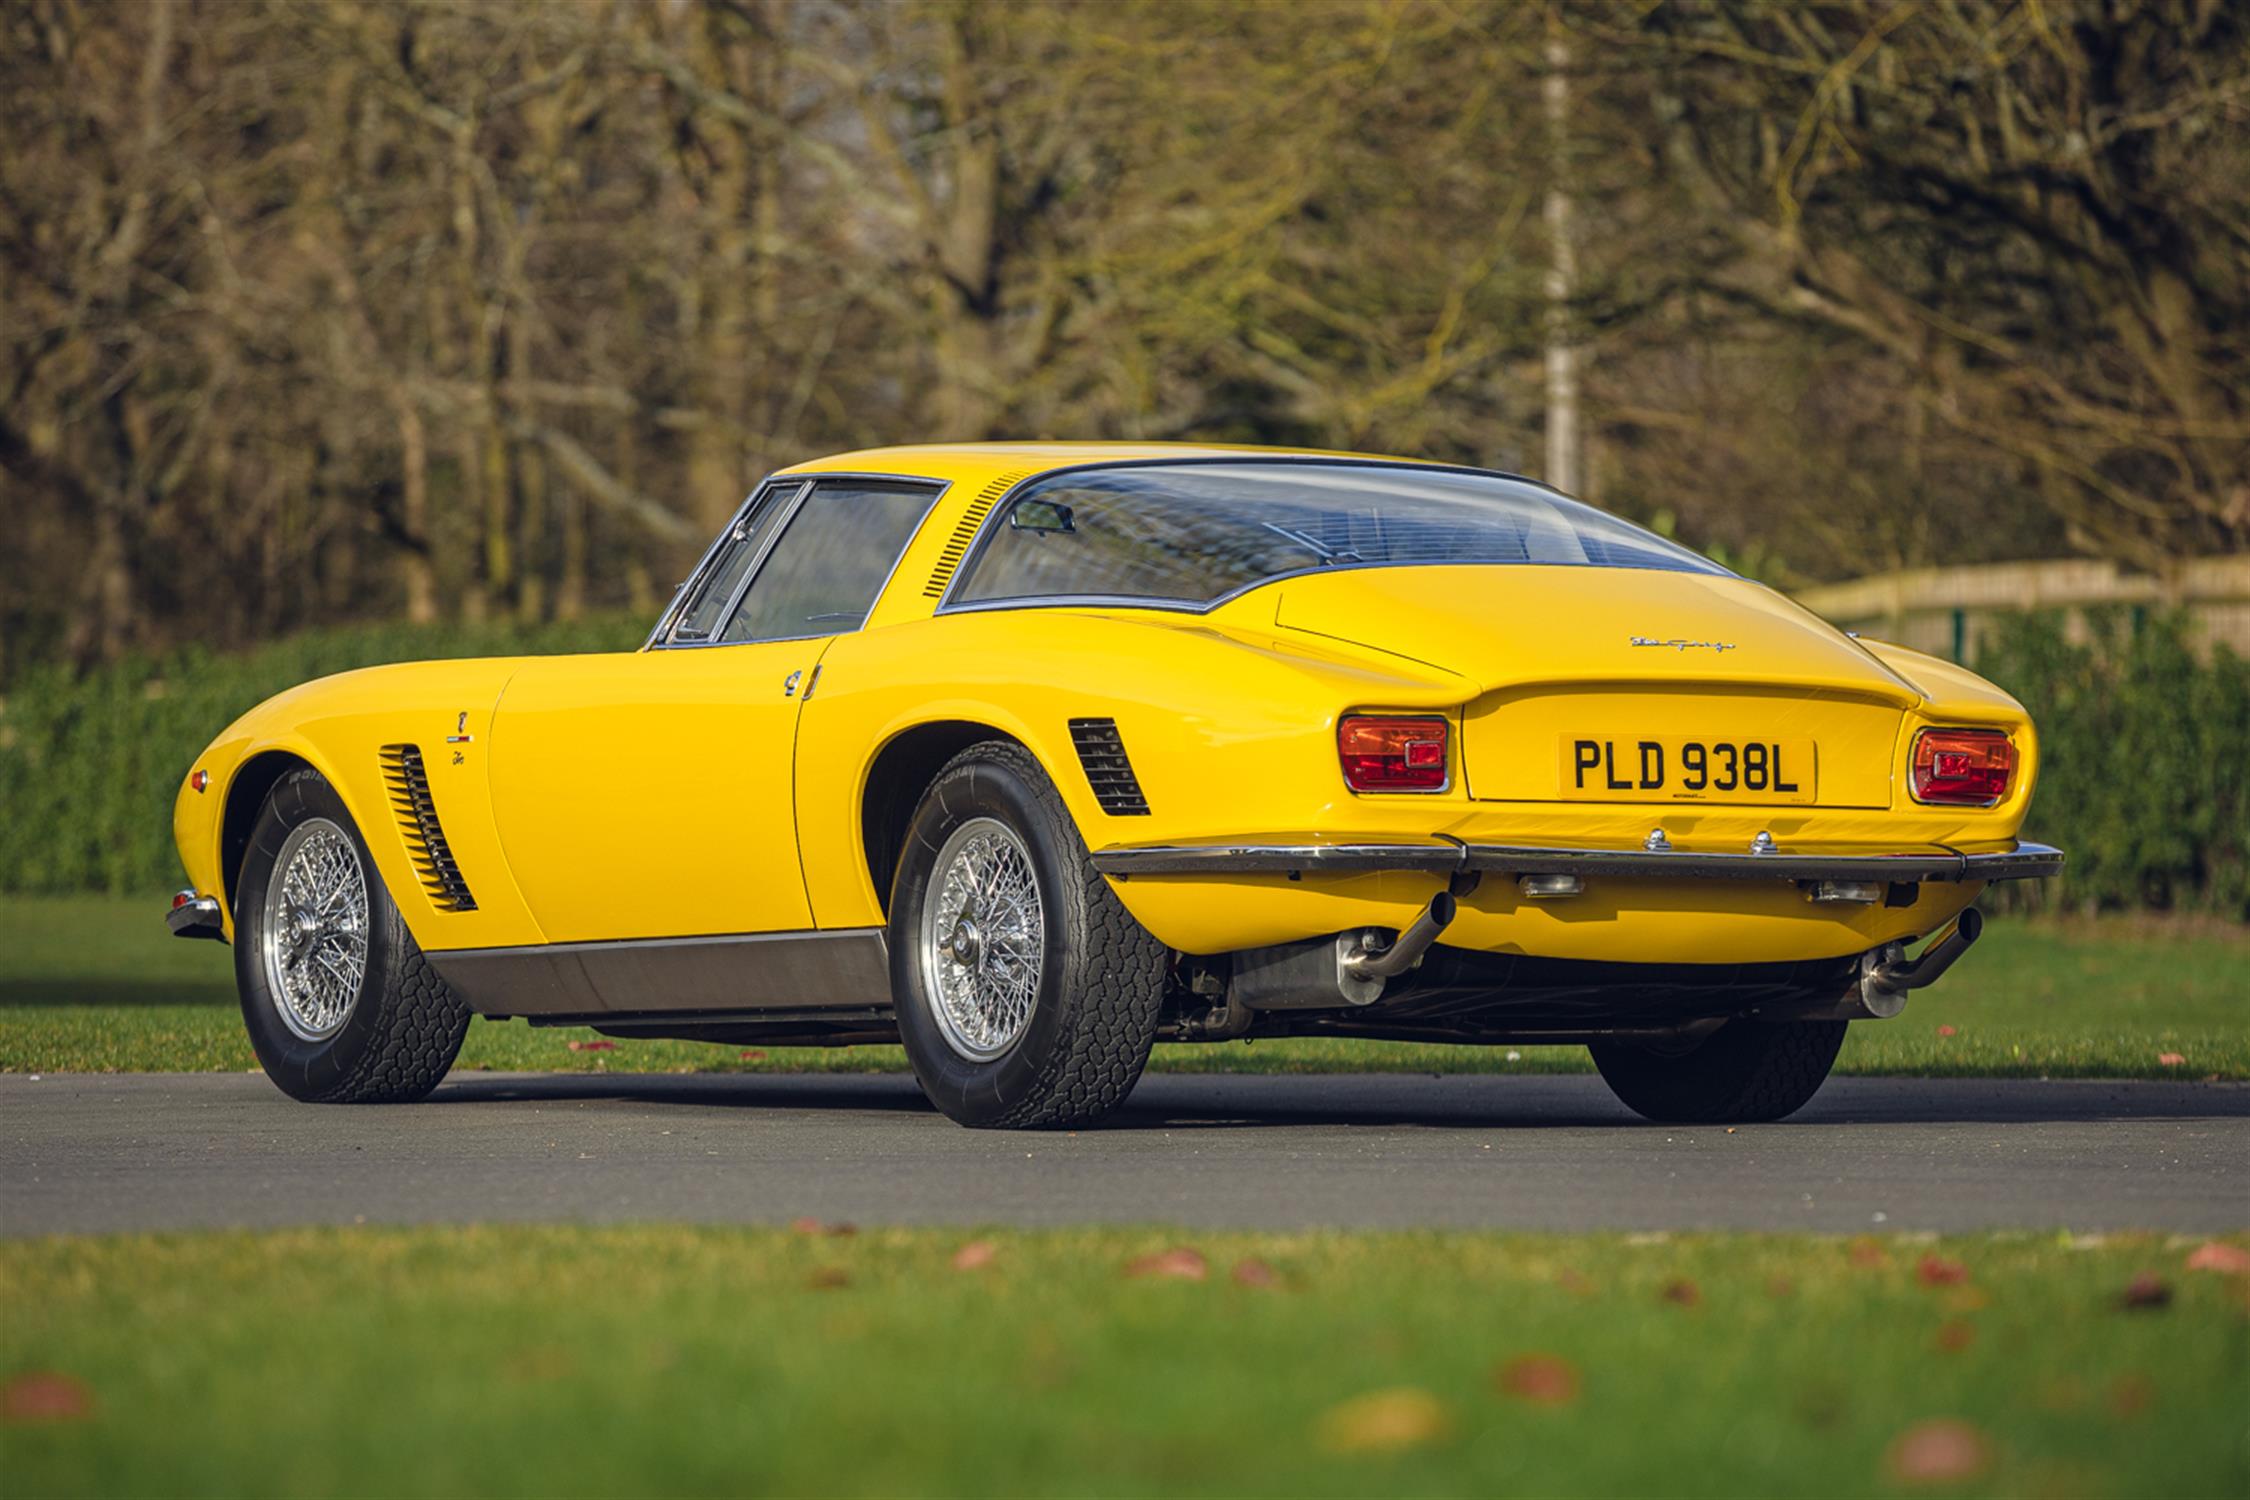 1967 Iso Grifo Series 1 GL350 - Image 4 of 10